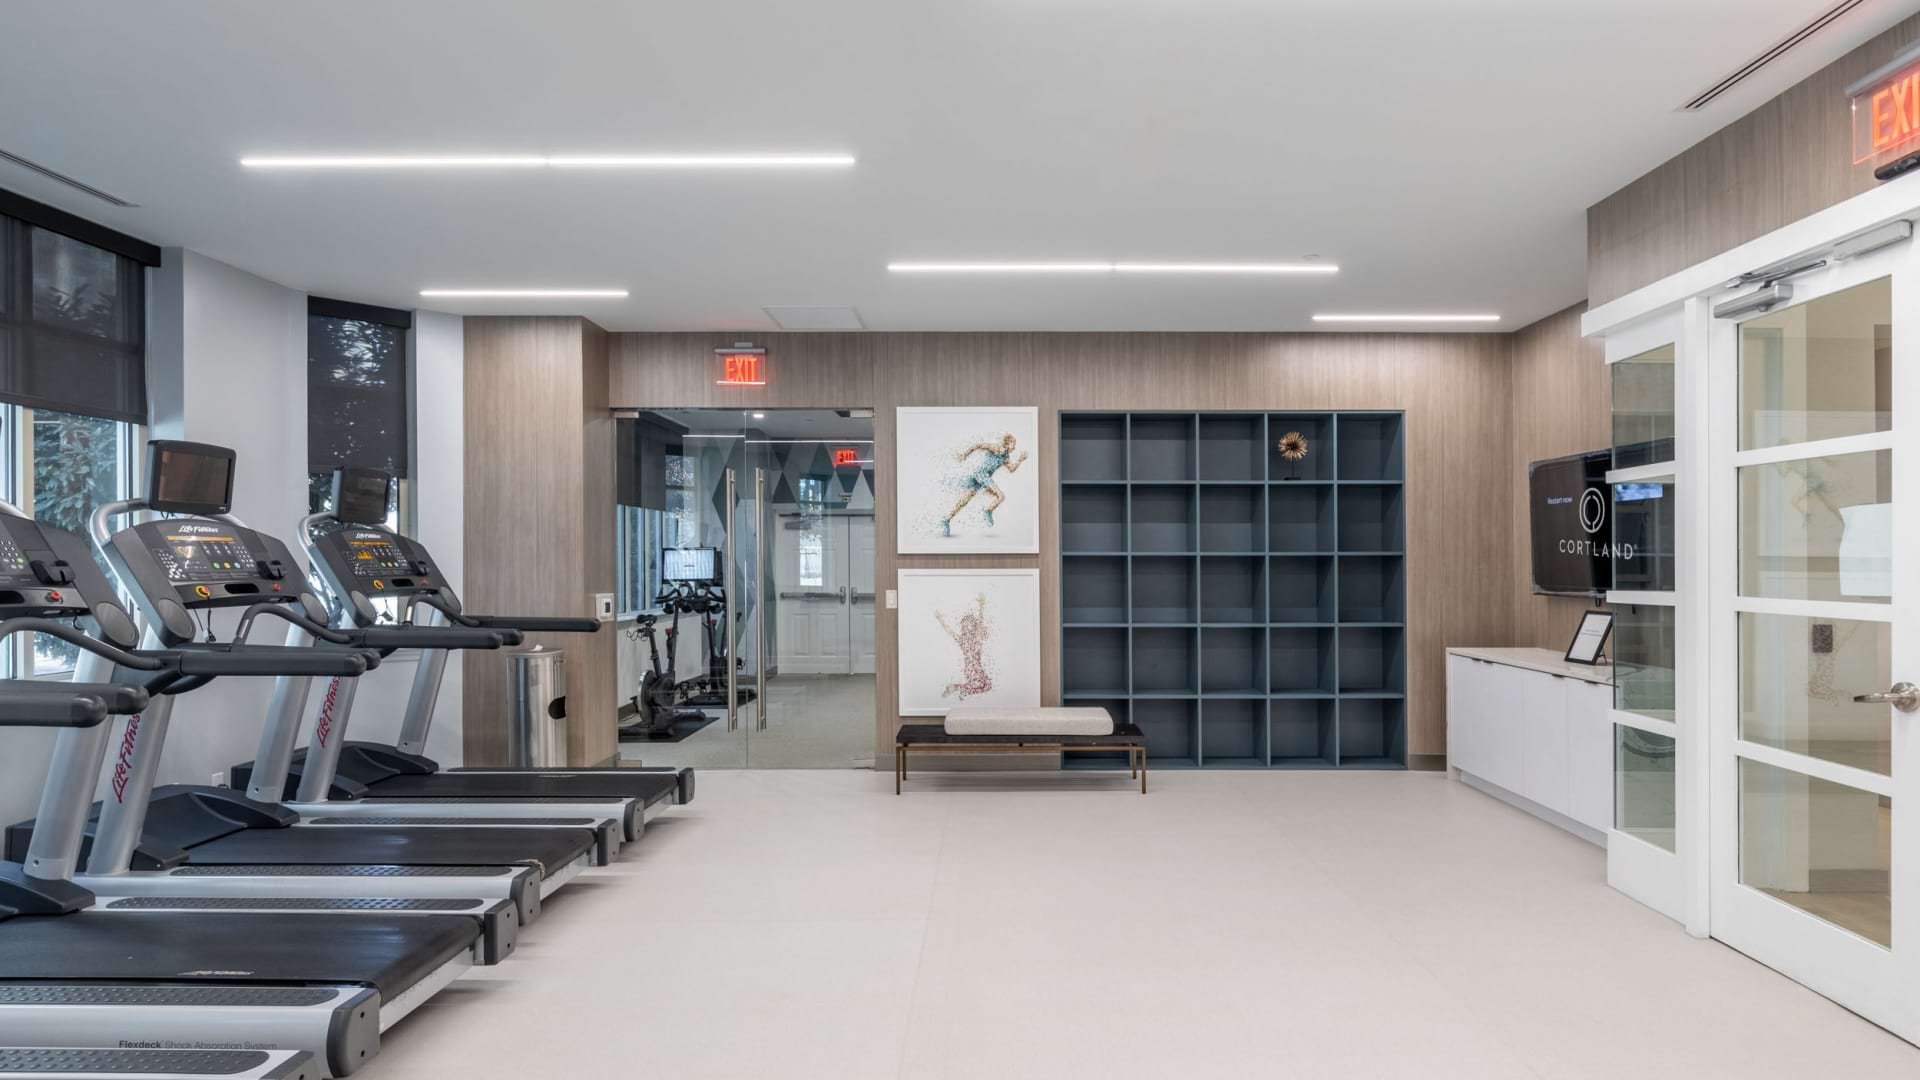 24/7 Fitness Center at Our Pentagon Apartments